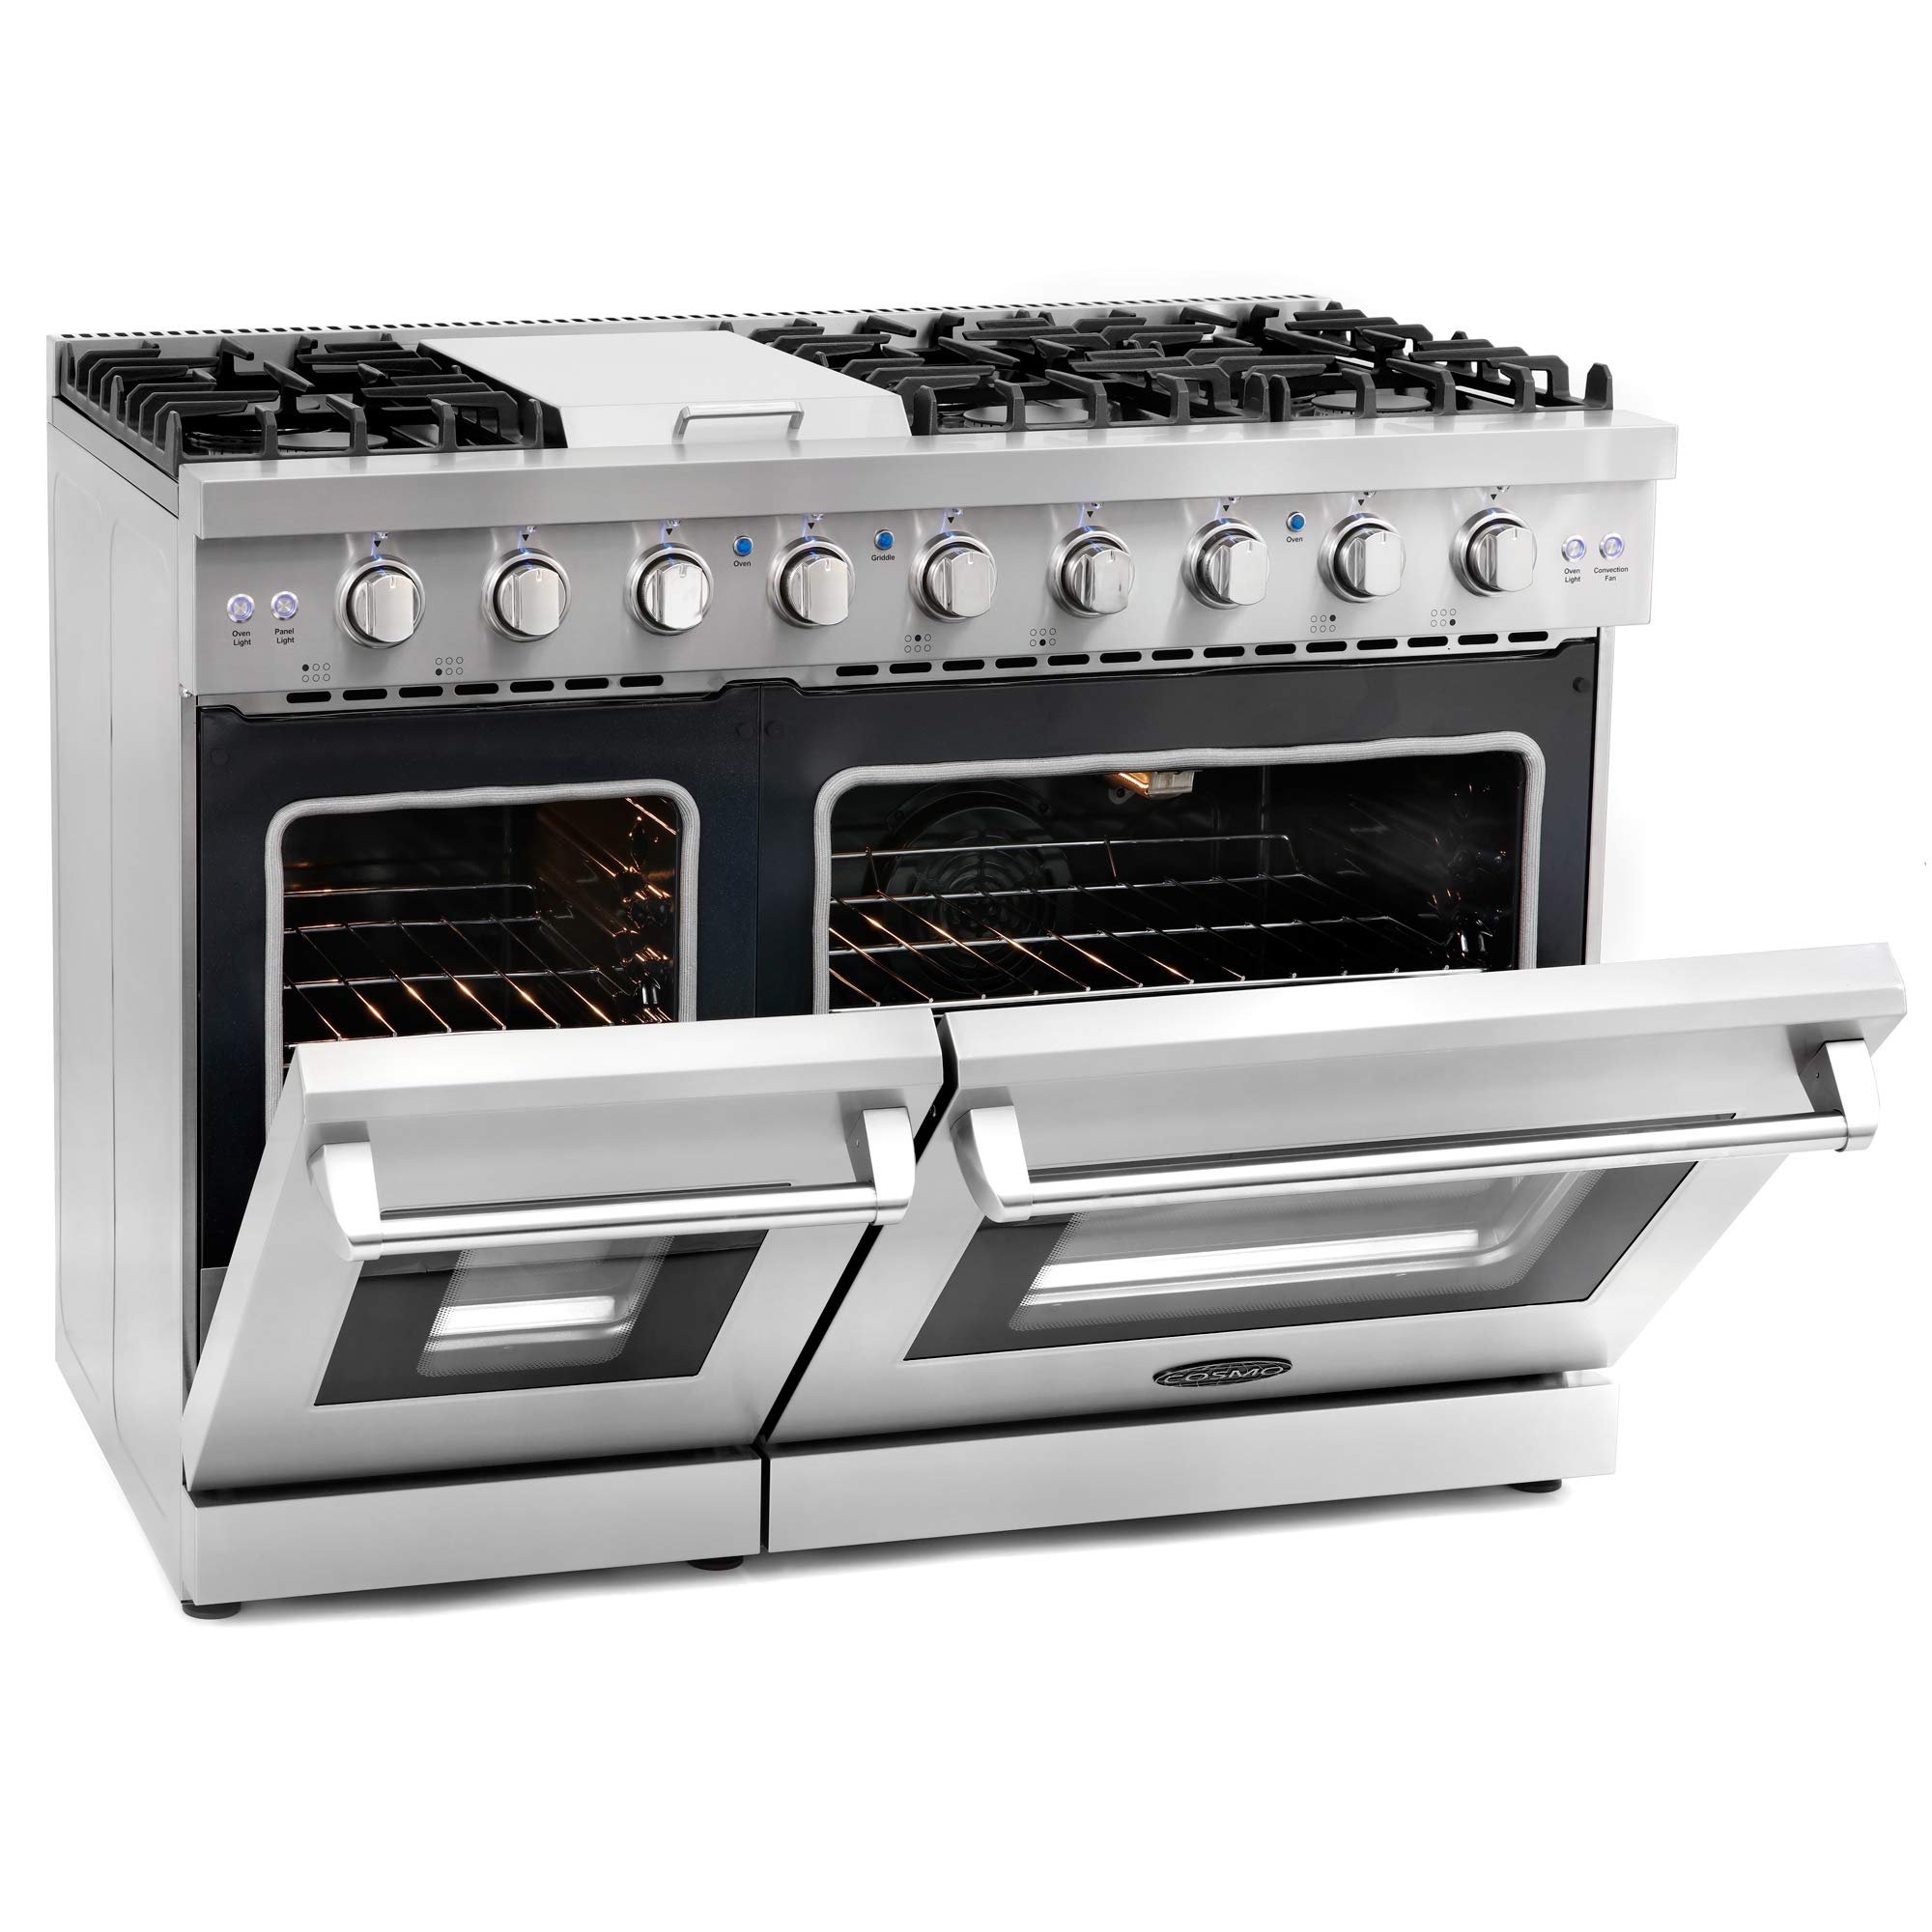 COSMO COS-EPGR486G 48 in. Slide-In Freestanding Double Gas Range with 6 Sealed Burner & Griddle Cooktop, Cast Iron Grates and Primary Convection Oven in Stainless Steel, 48 inch